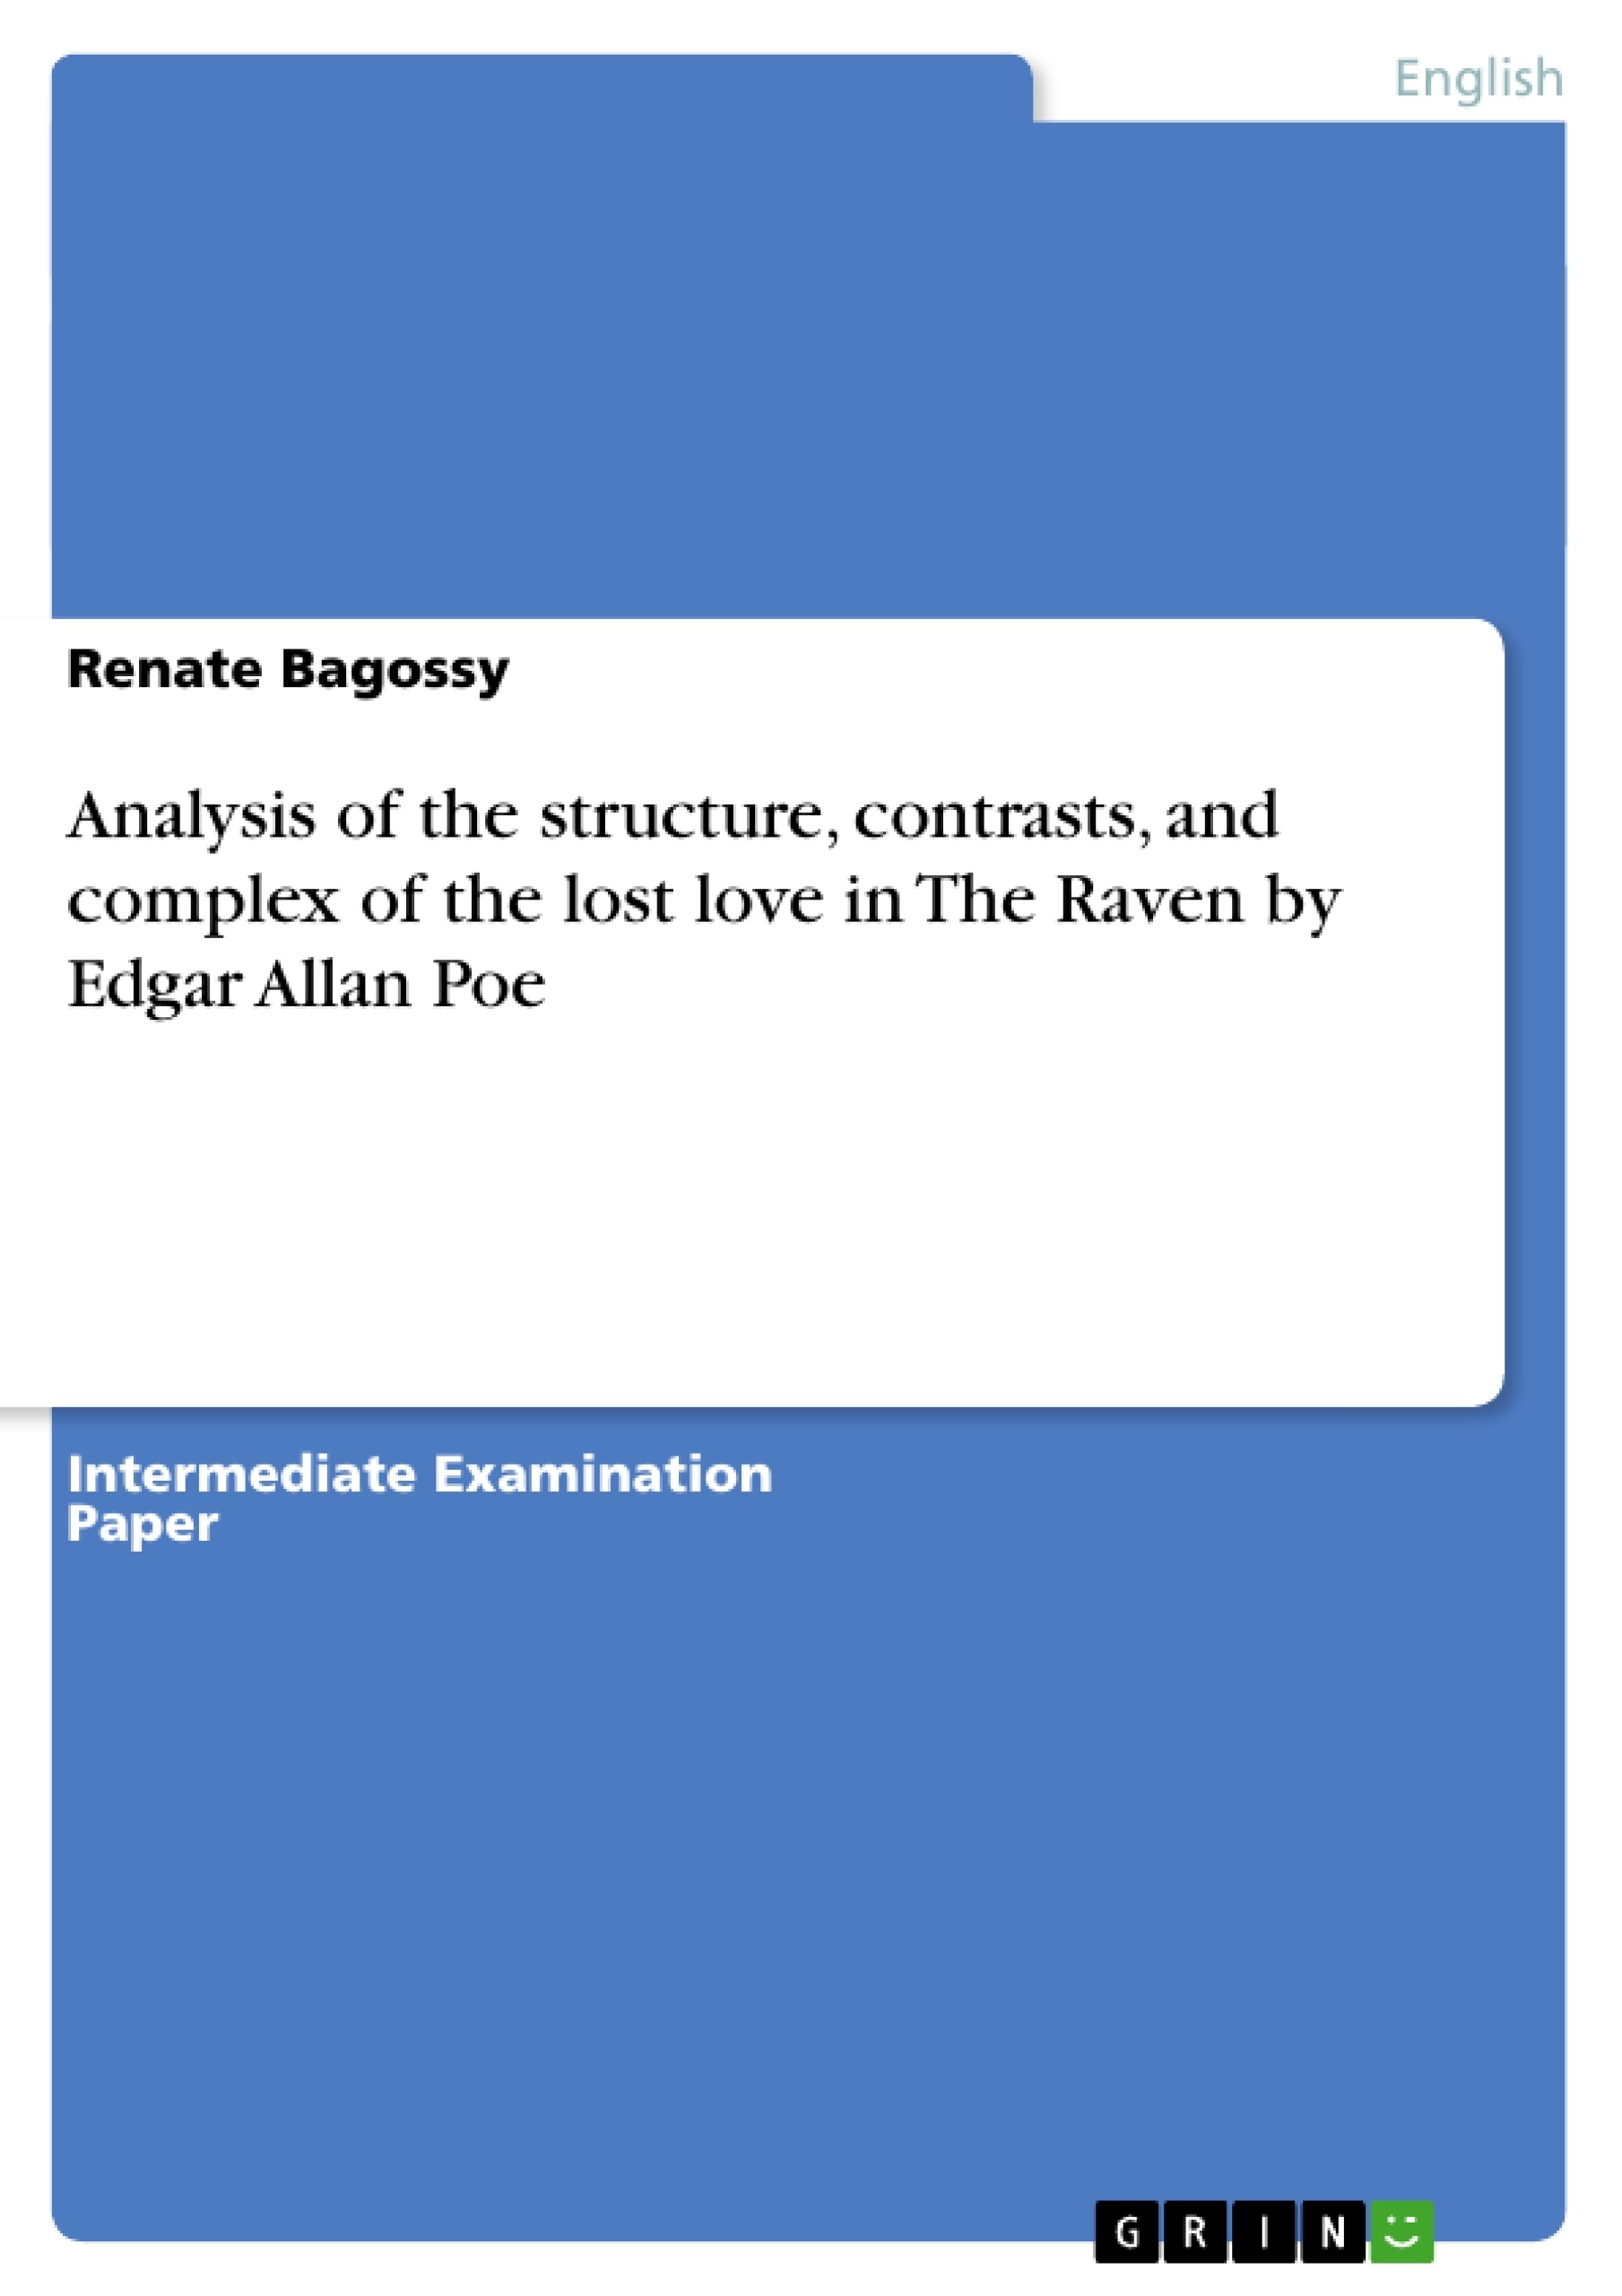 Título: Analysis of the structure, contrasts, and complex of the lost love in The Raven by Edgar Allan Poe